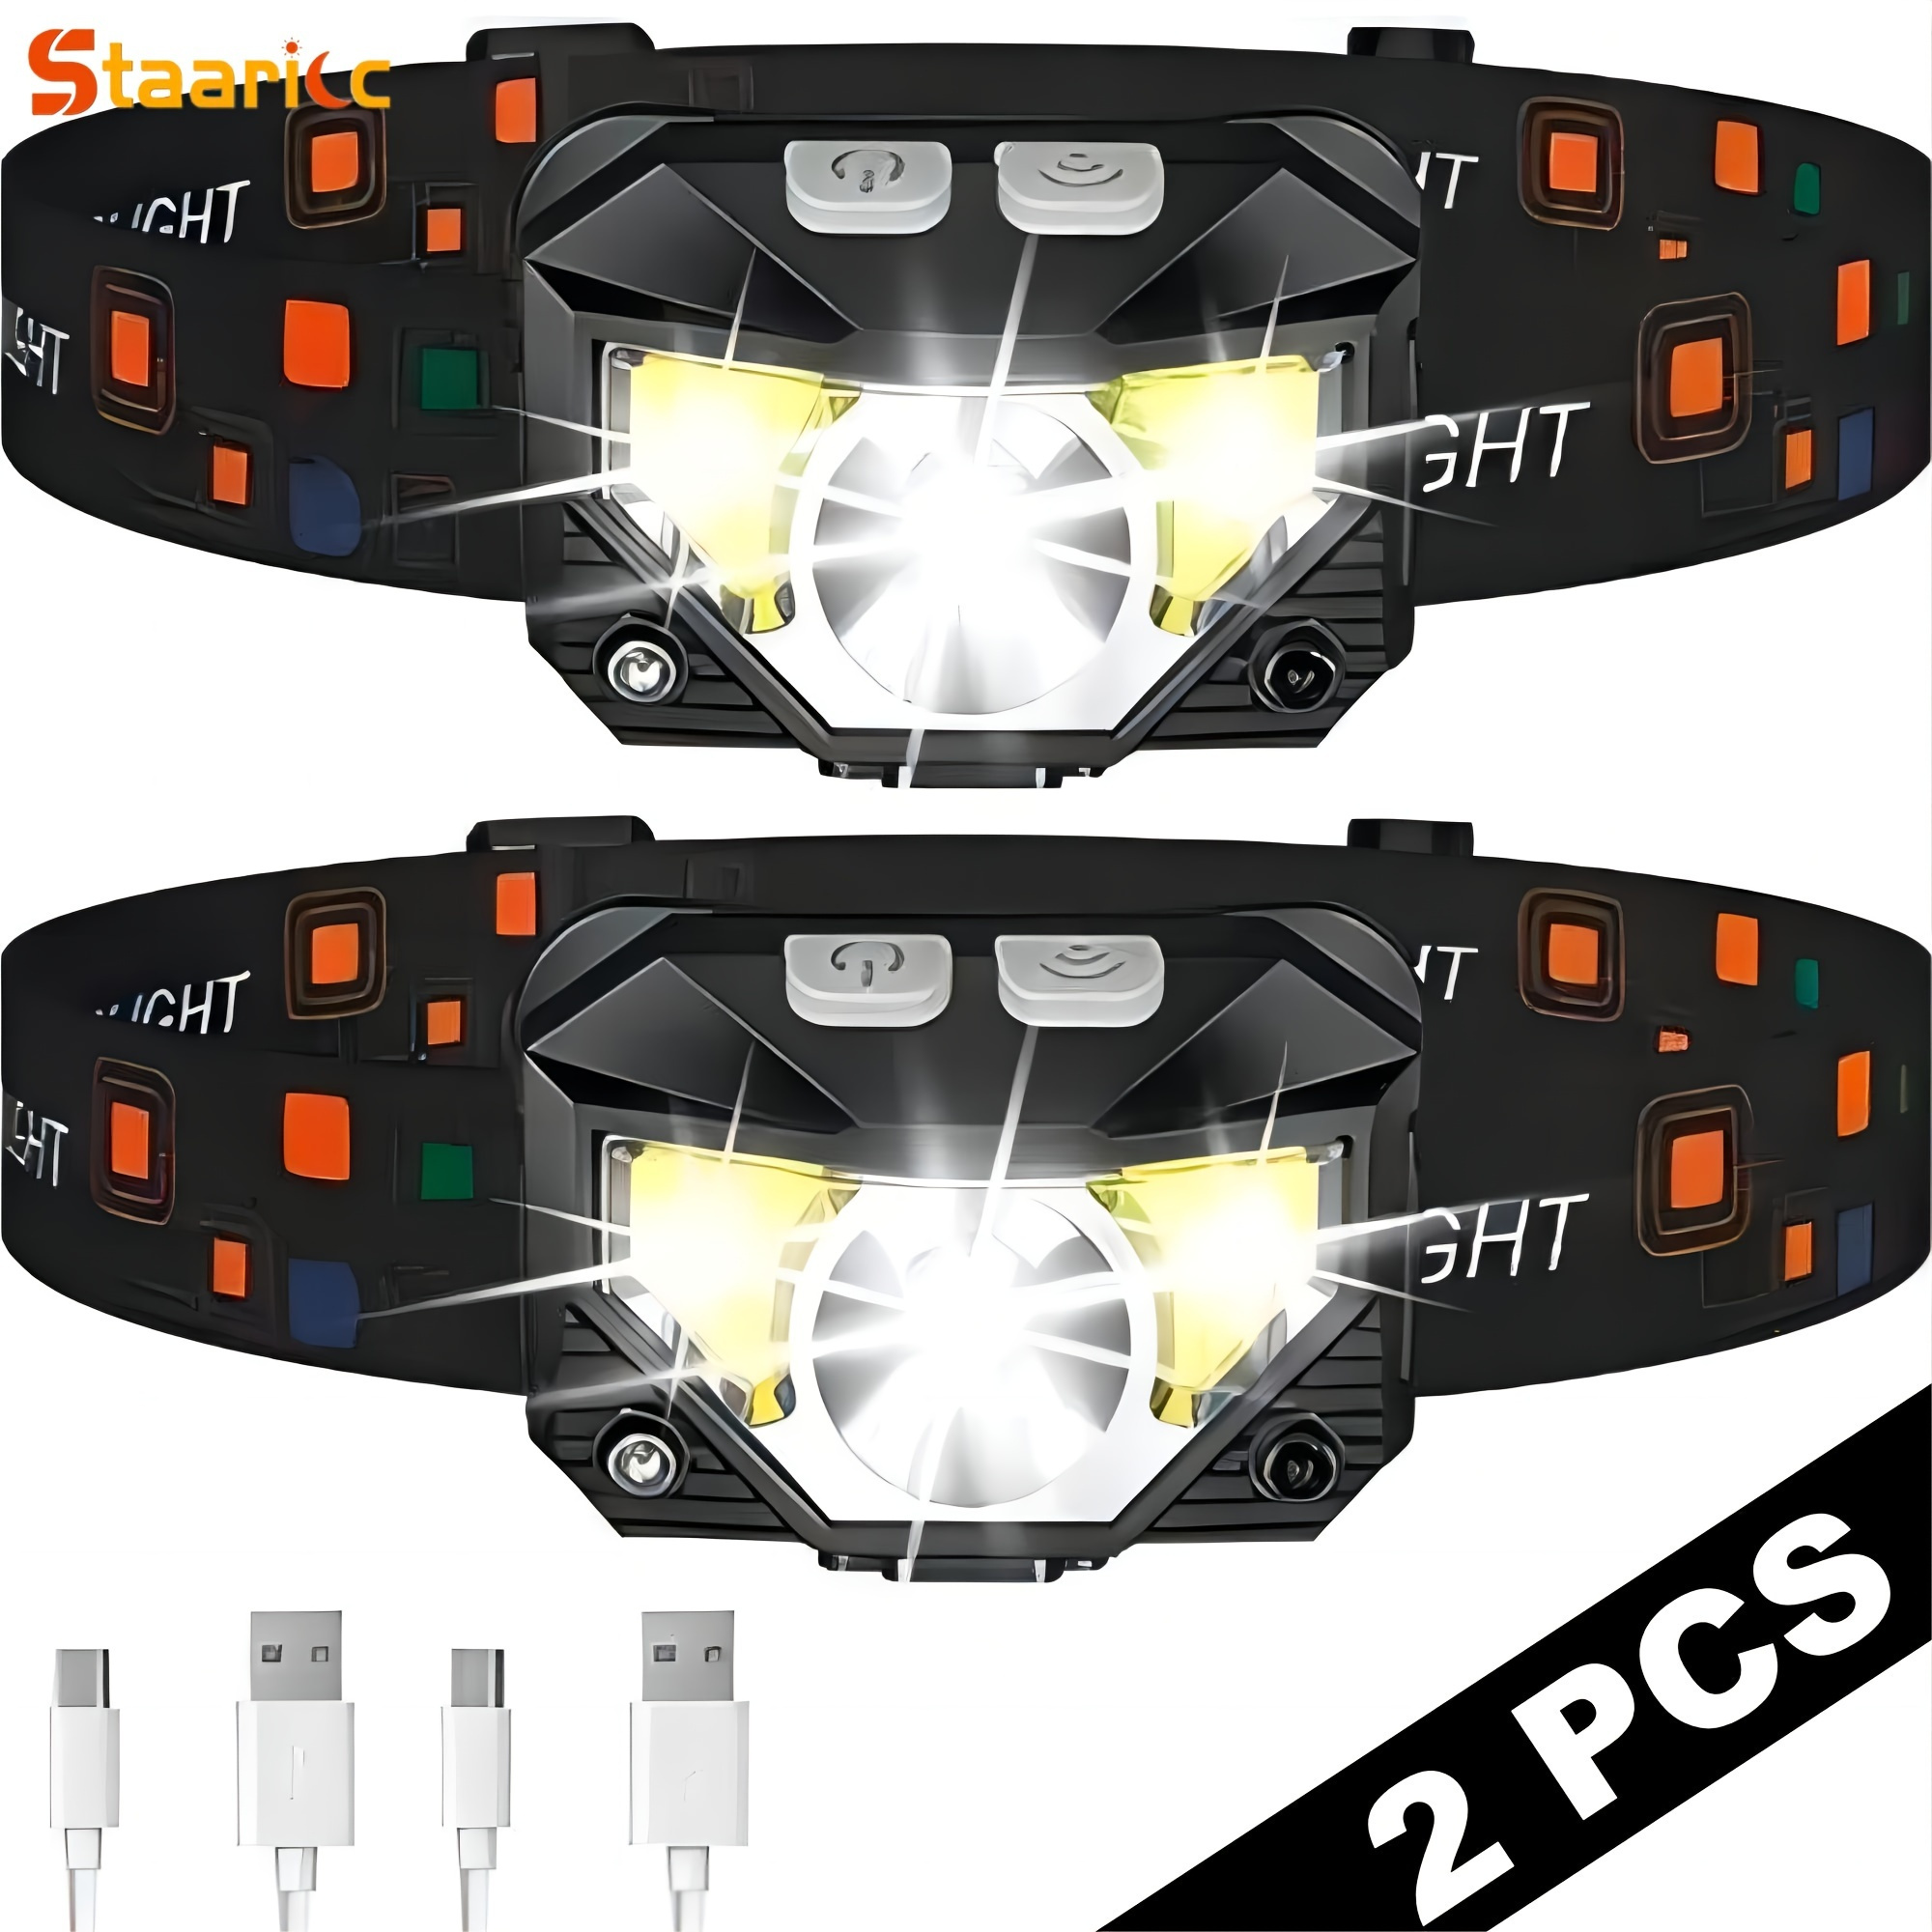 

2 Packs 1200 Lumens Ultra Bright Led Rechargeable Headlight, With Red And White Light Motion Sensor, 8 Lighting Modes For Outdoor Camping, Running, Fishing, Emergency